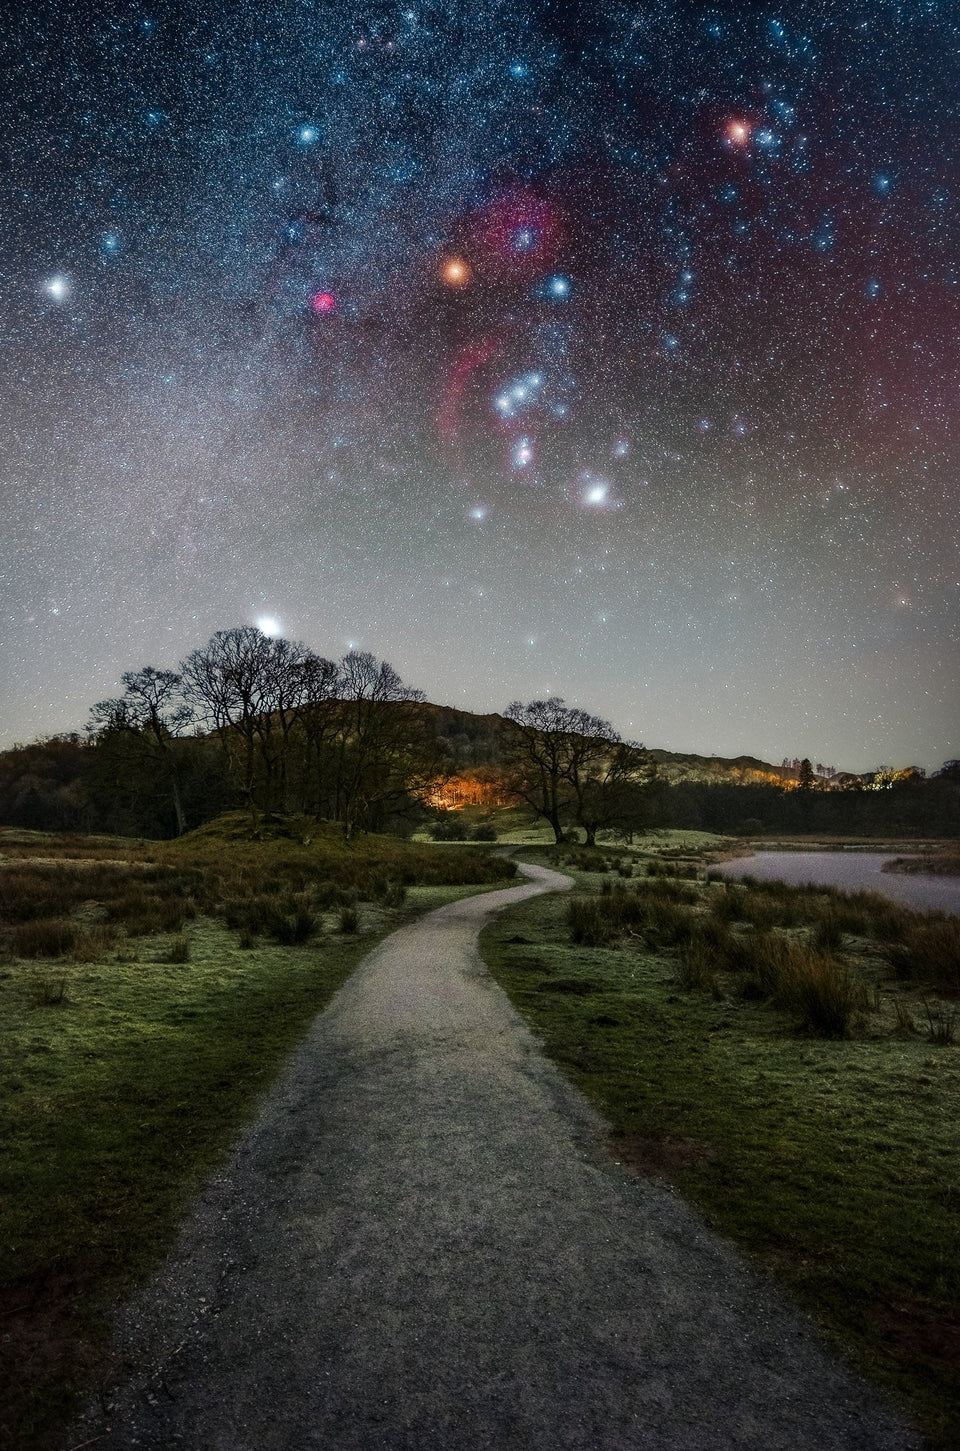 The River Brathay & Orion Poster